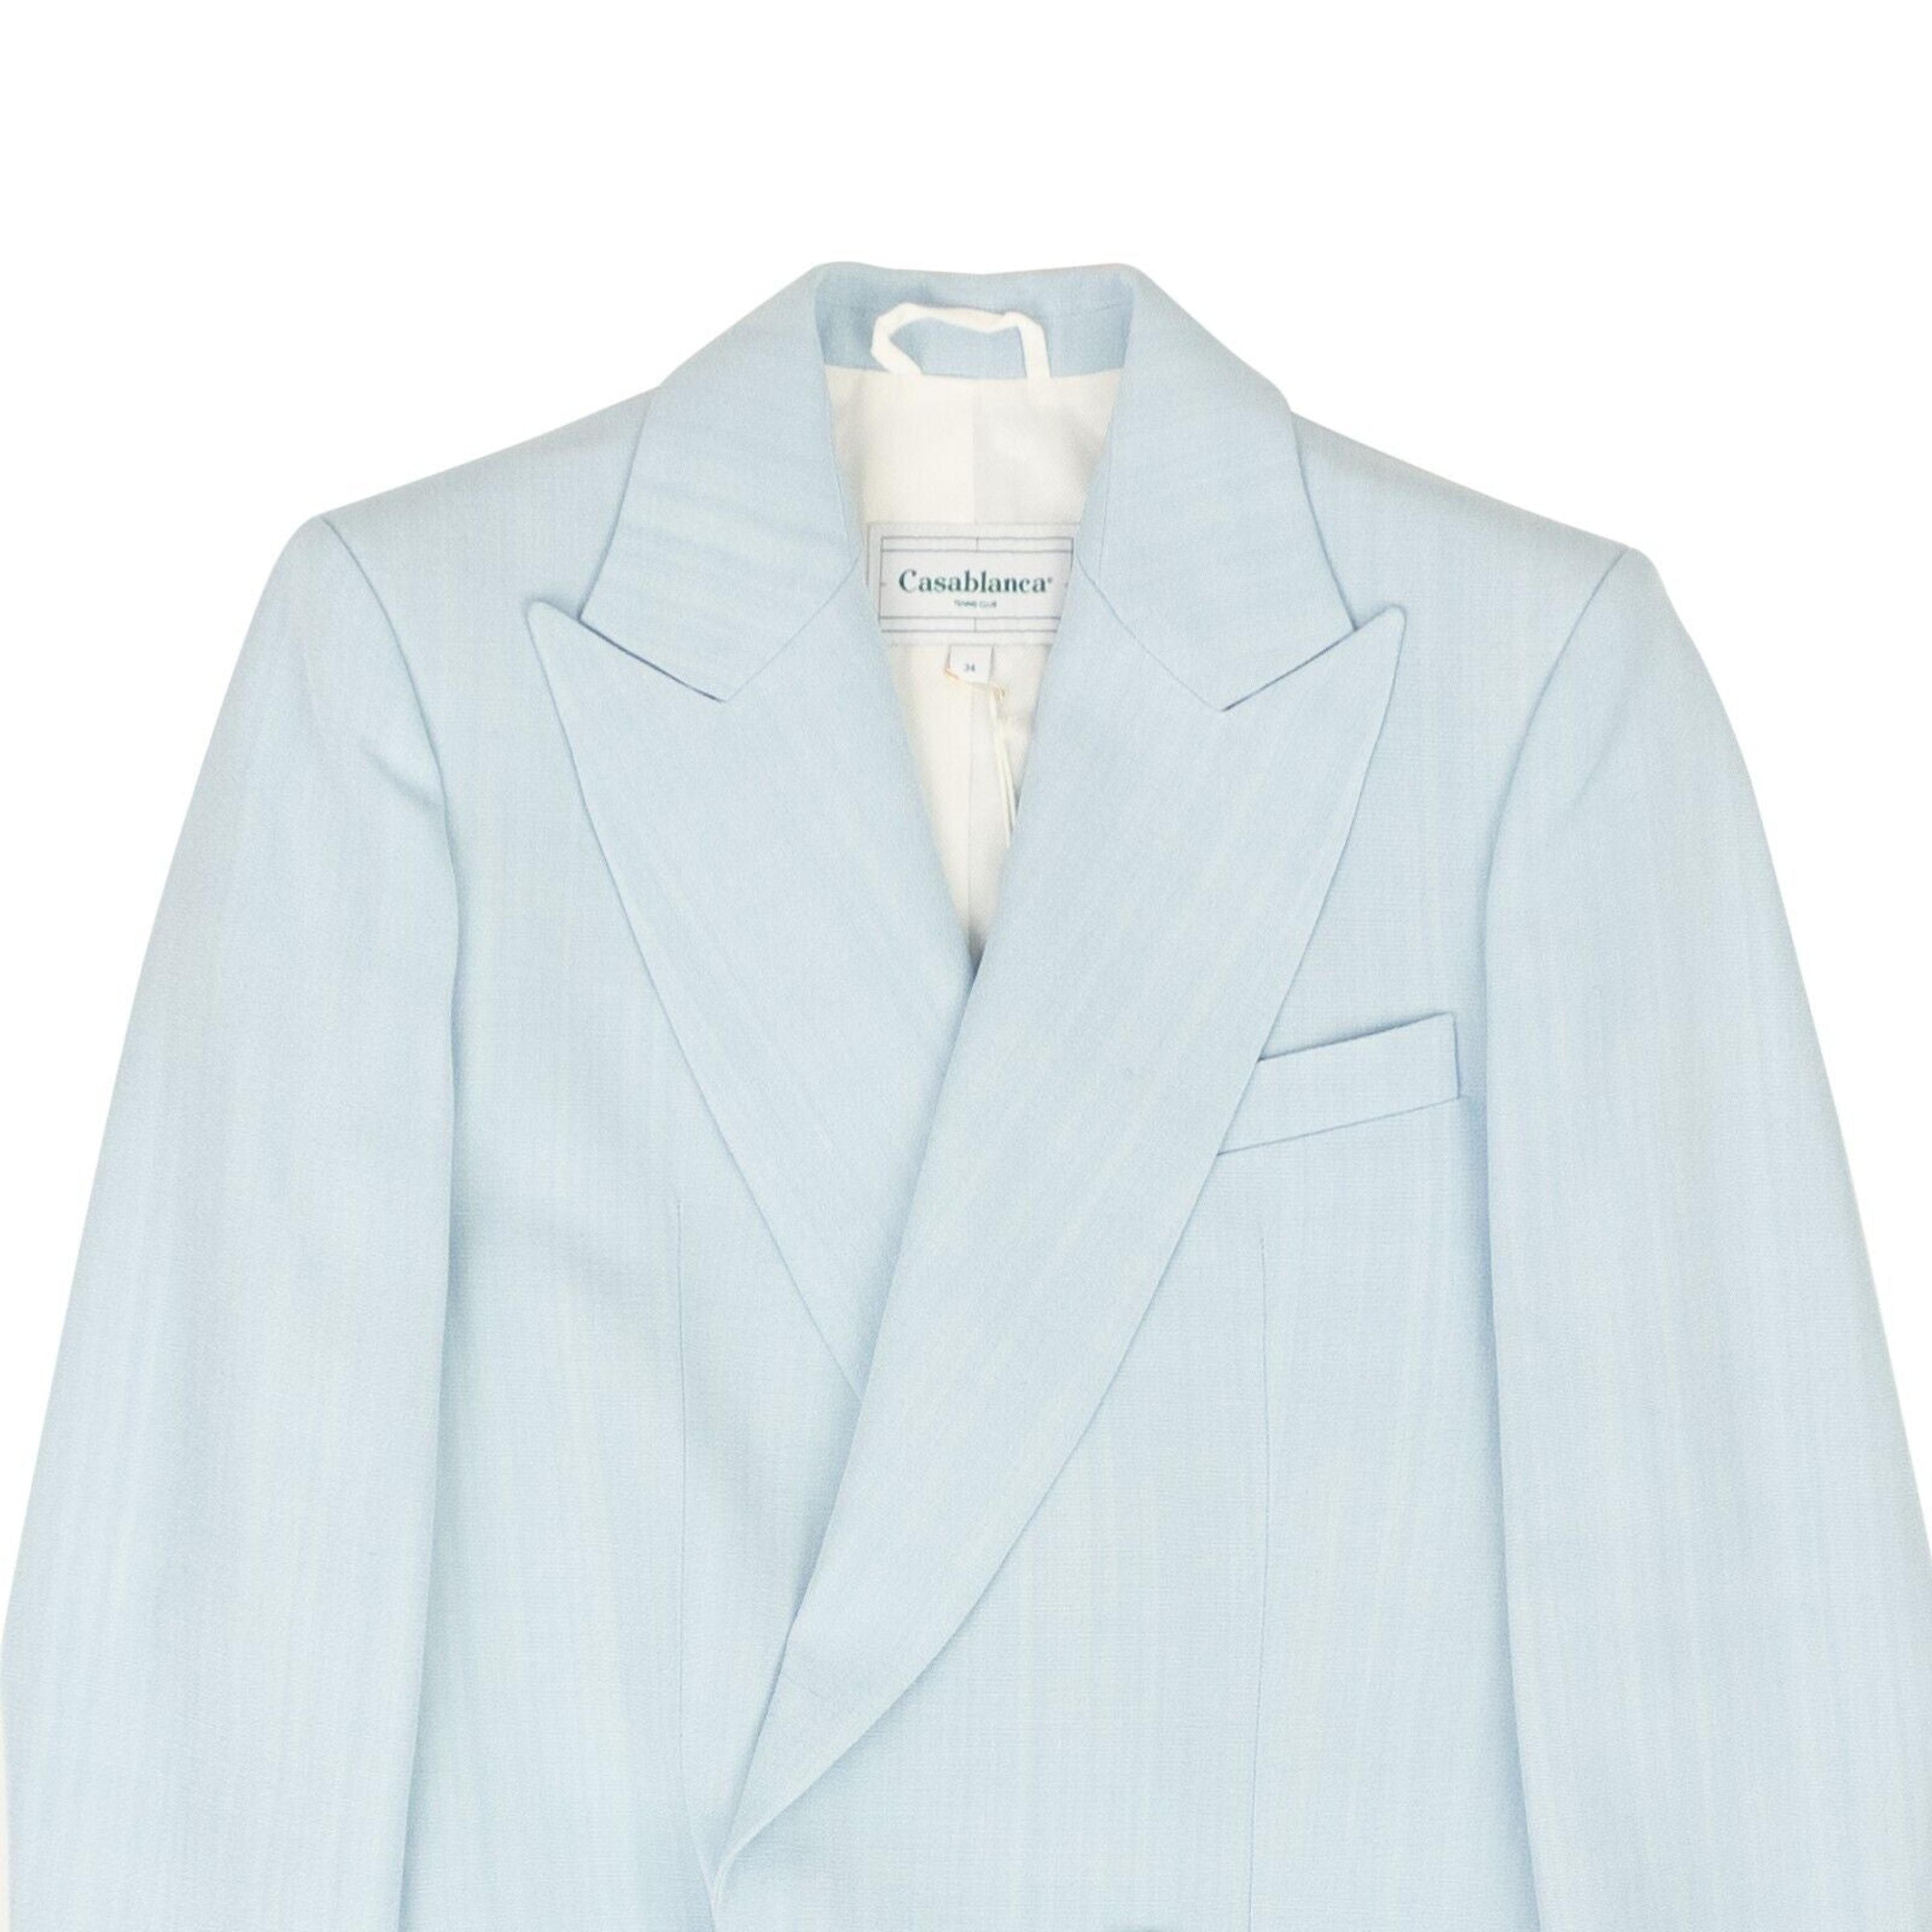 Alternate View 1 of Light Blue Viscose Double-Breasted Blazer